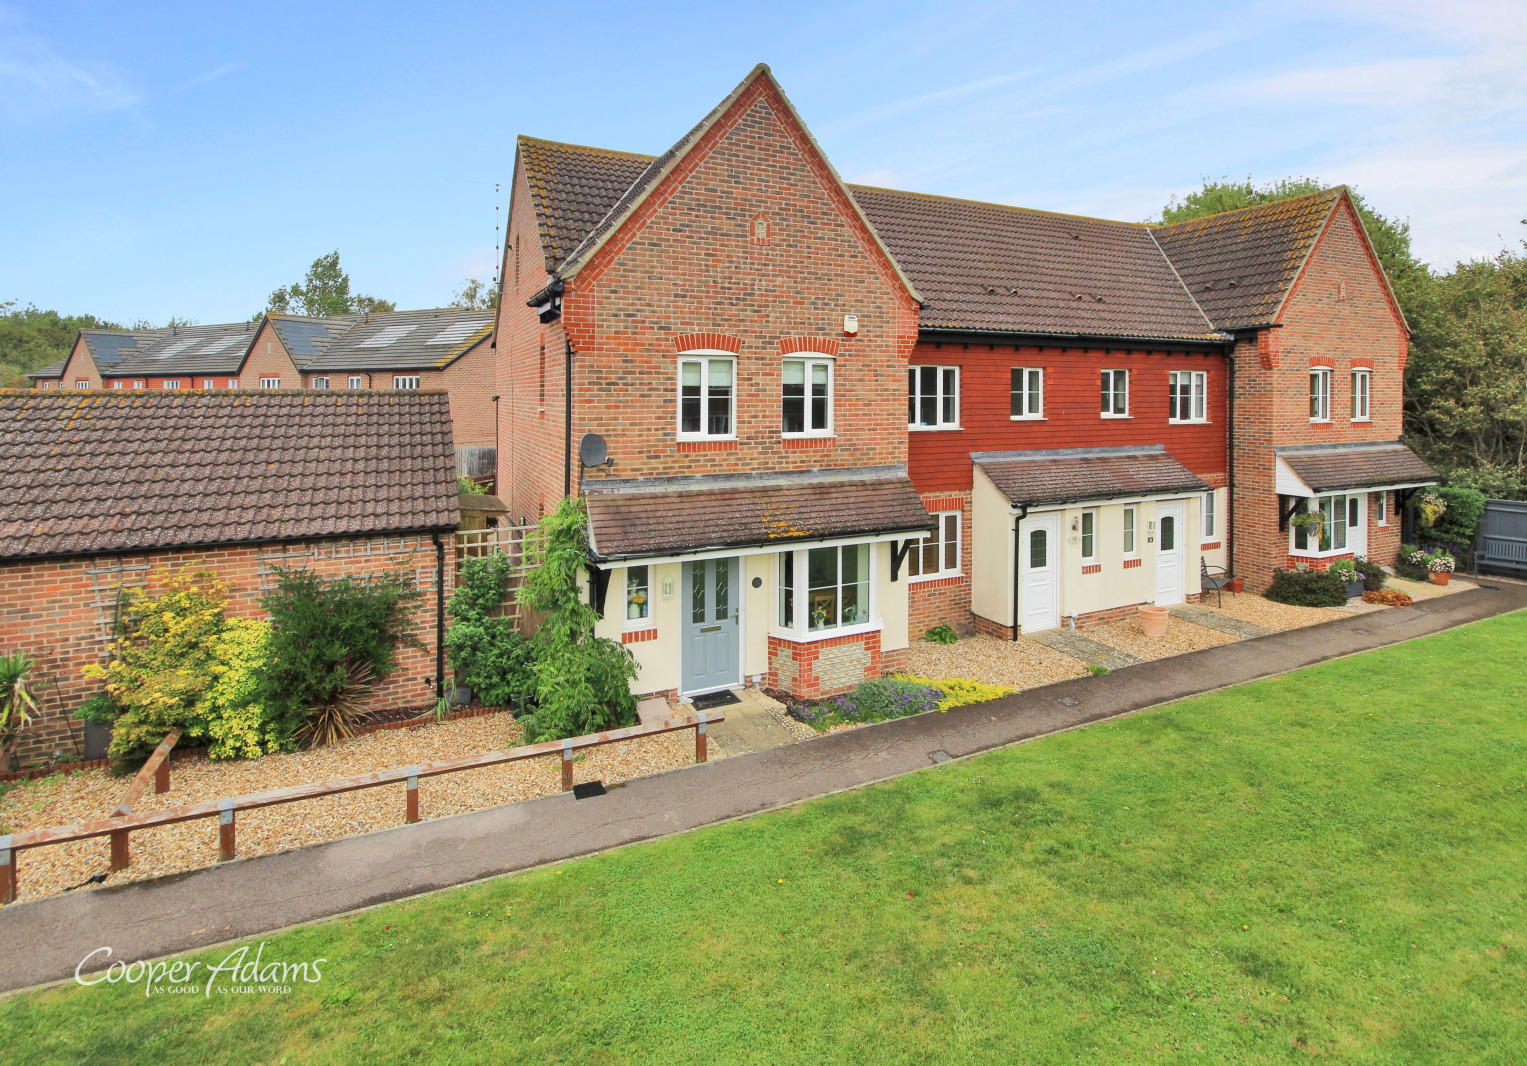 4 bed house for sale  - Property Image 1